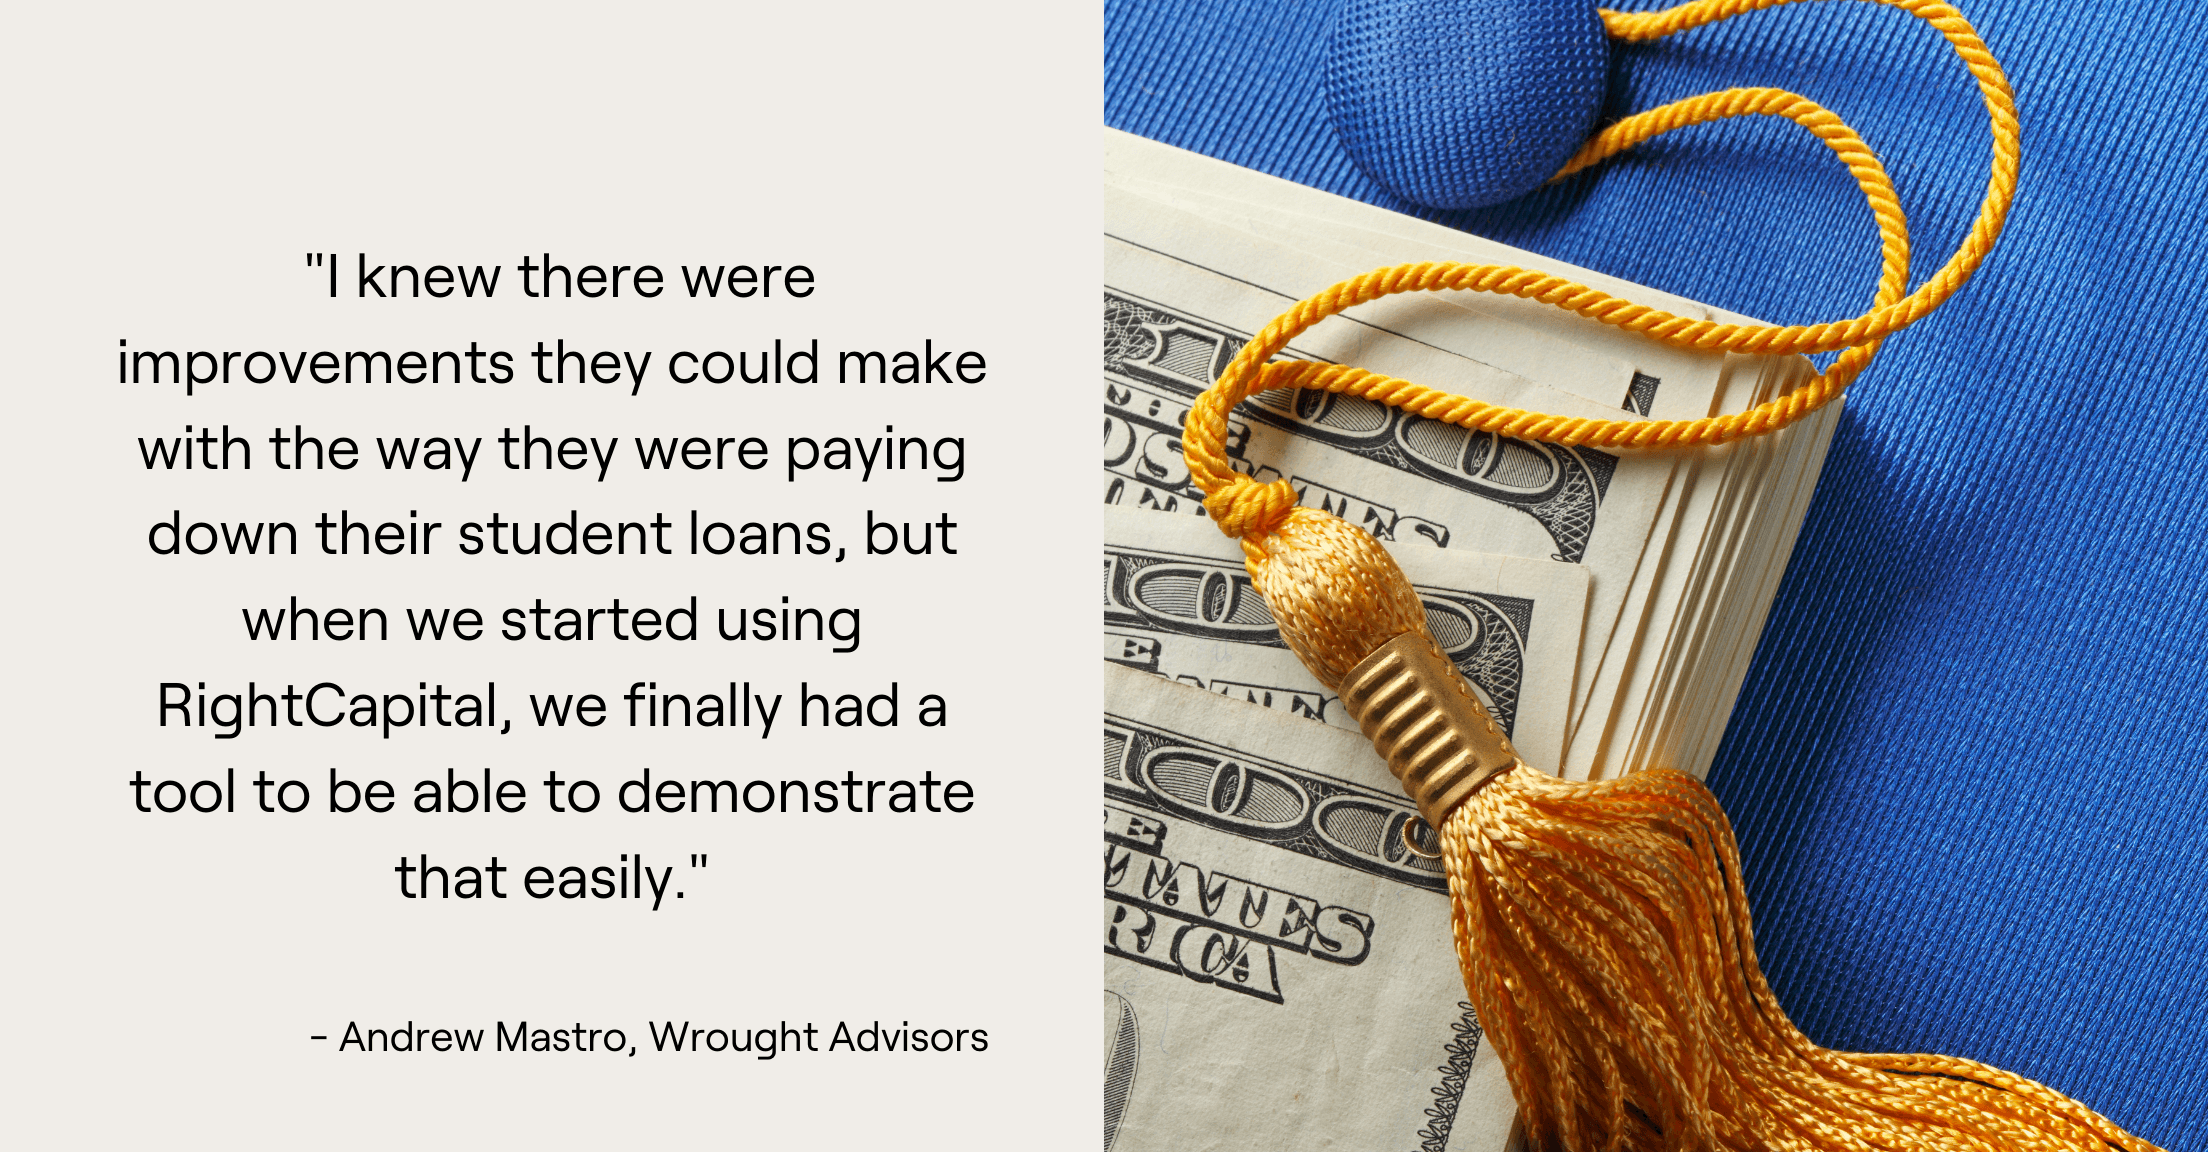 Graduation cap, money, and a quote from advisor Andrew Mastro: "I knew there were improvements they could make with the way they were paying down their student loans, but when we started using RightCapital, we finally had a tool to be able to demonstrate that easily."